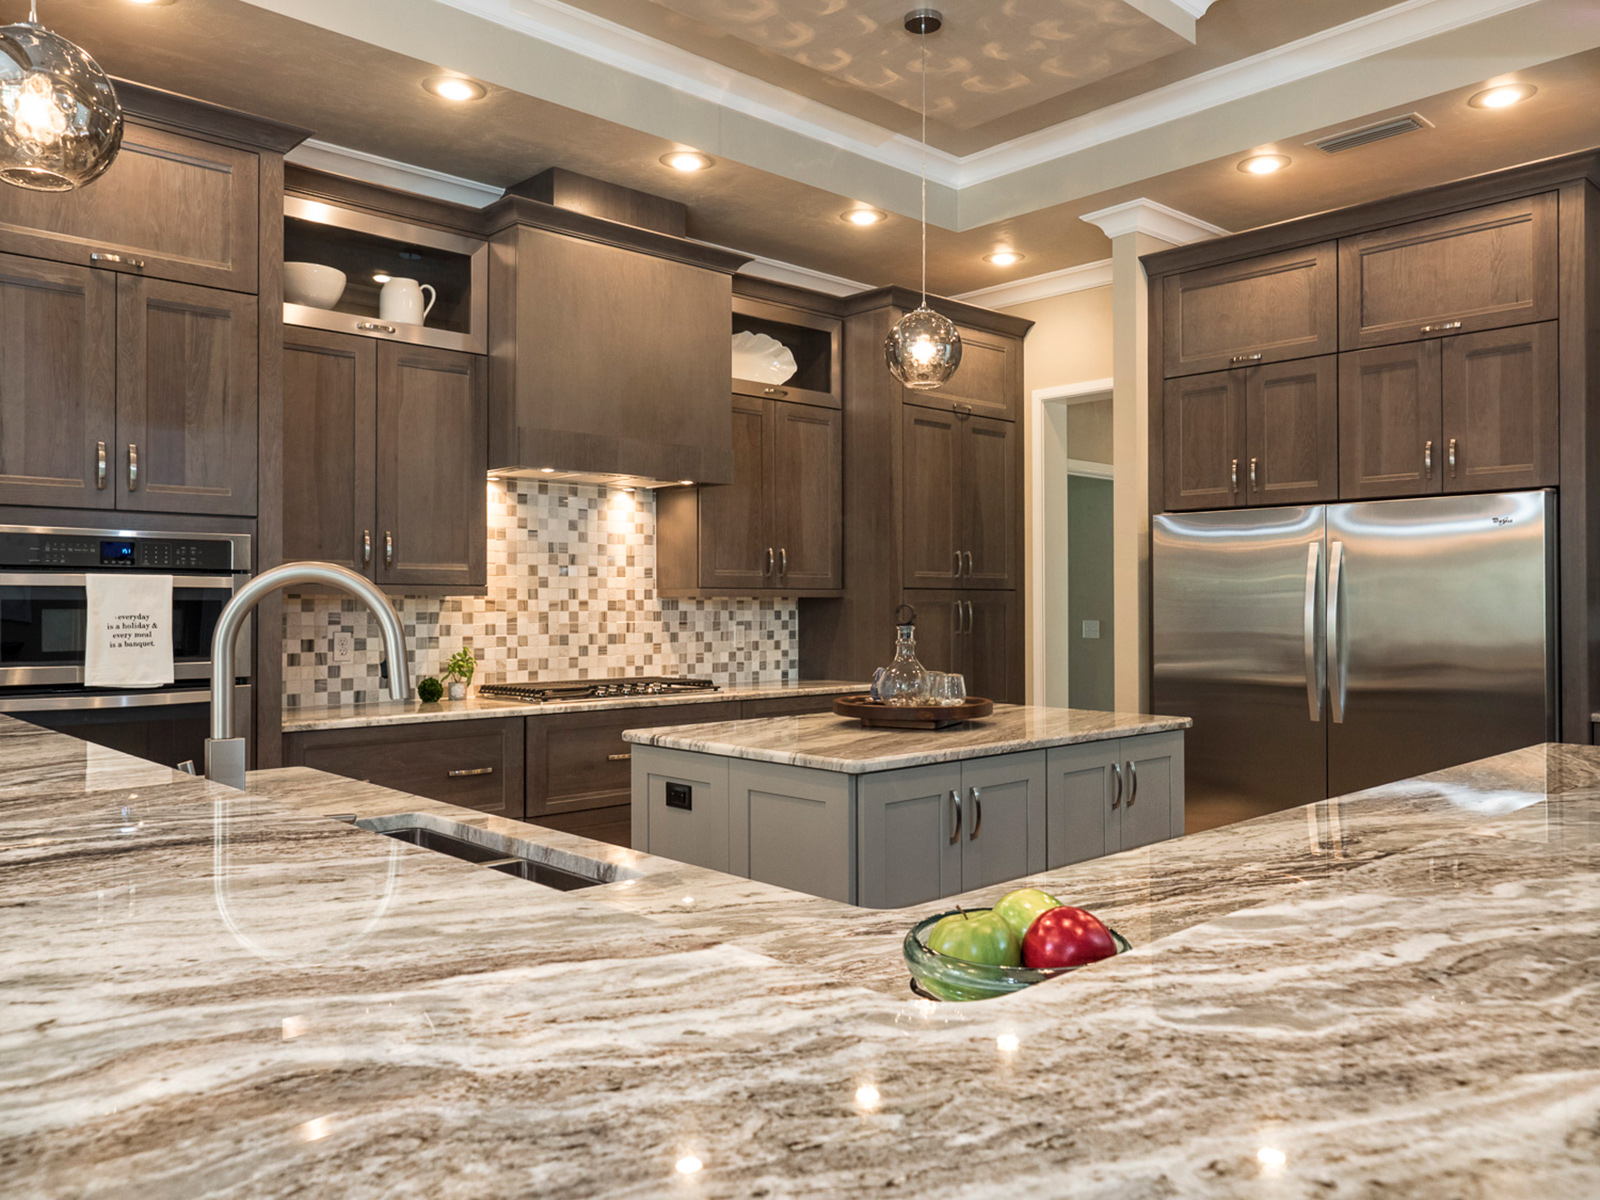 The Complete Guide to Hiring Your Kitchen Remodel Contractor